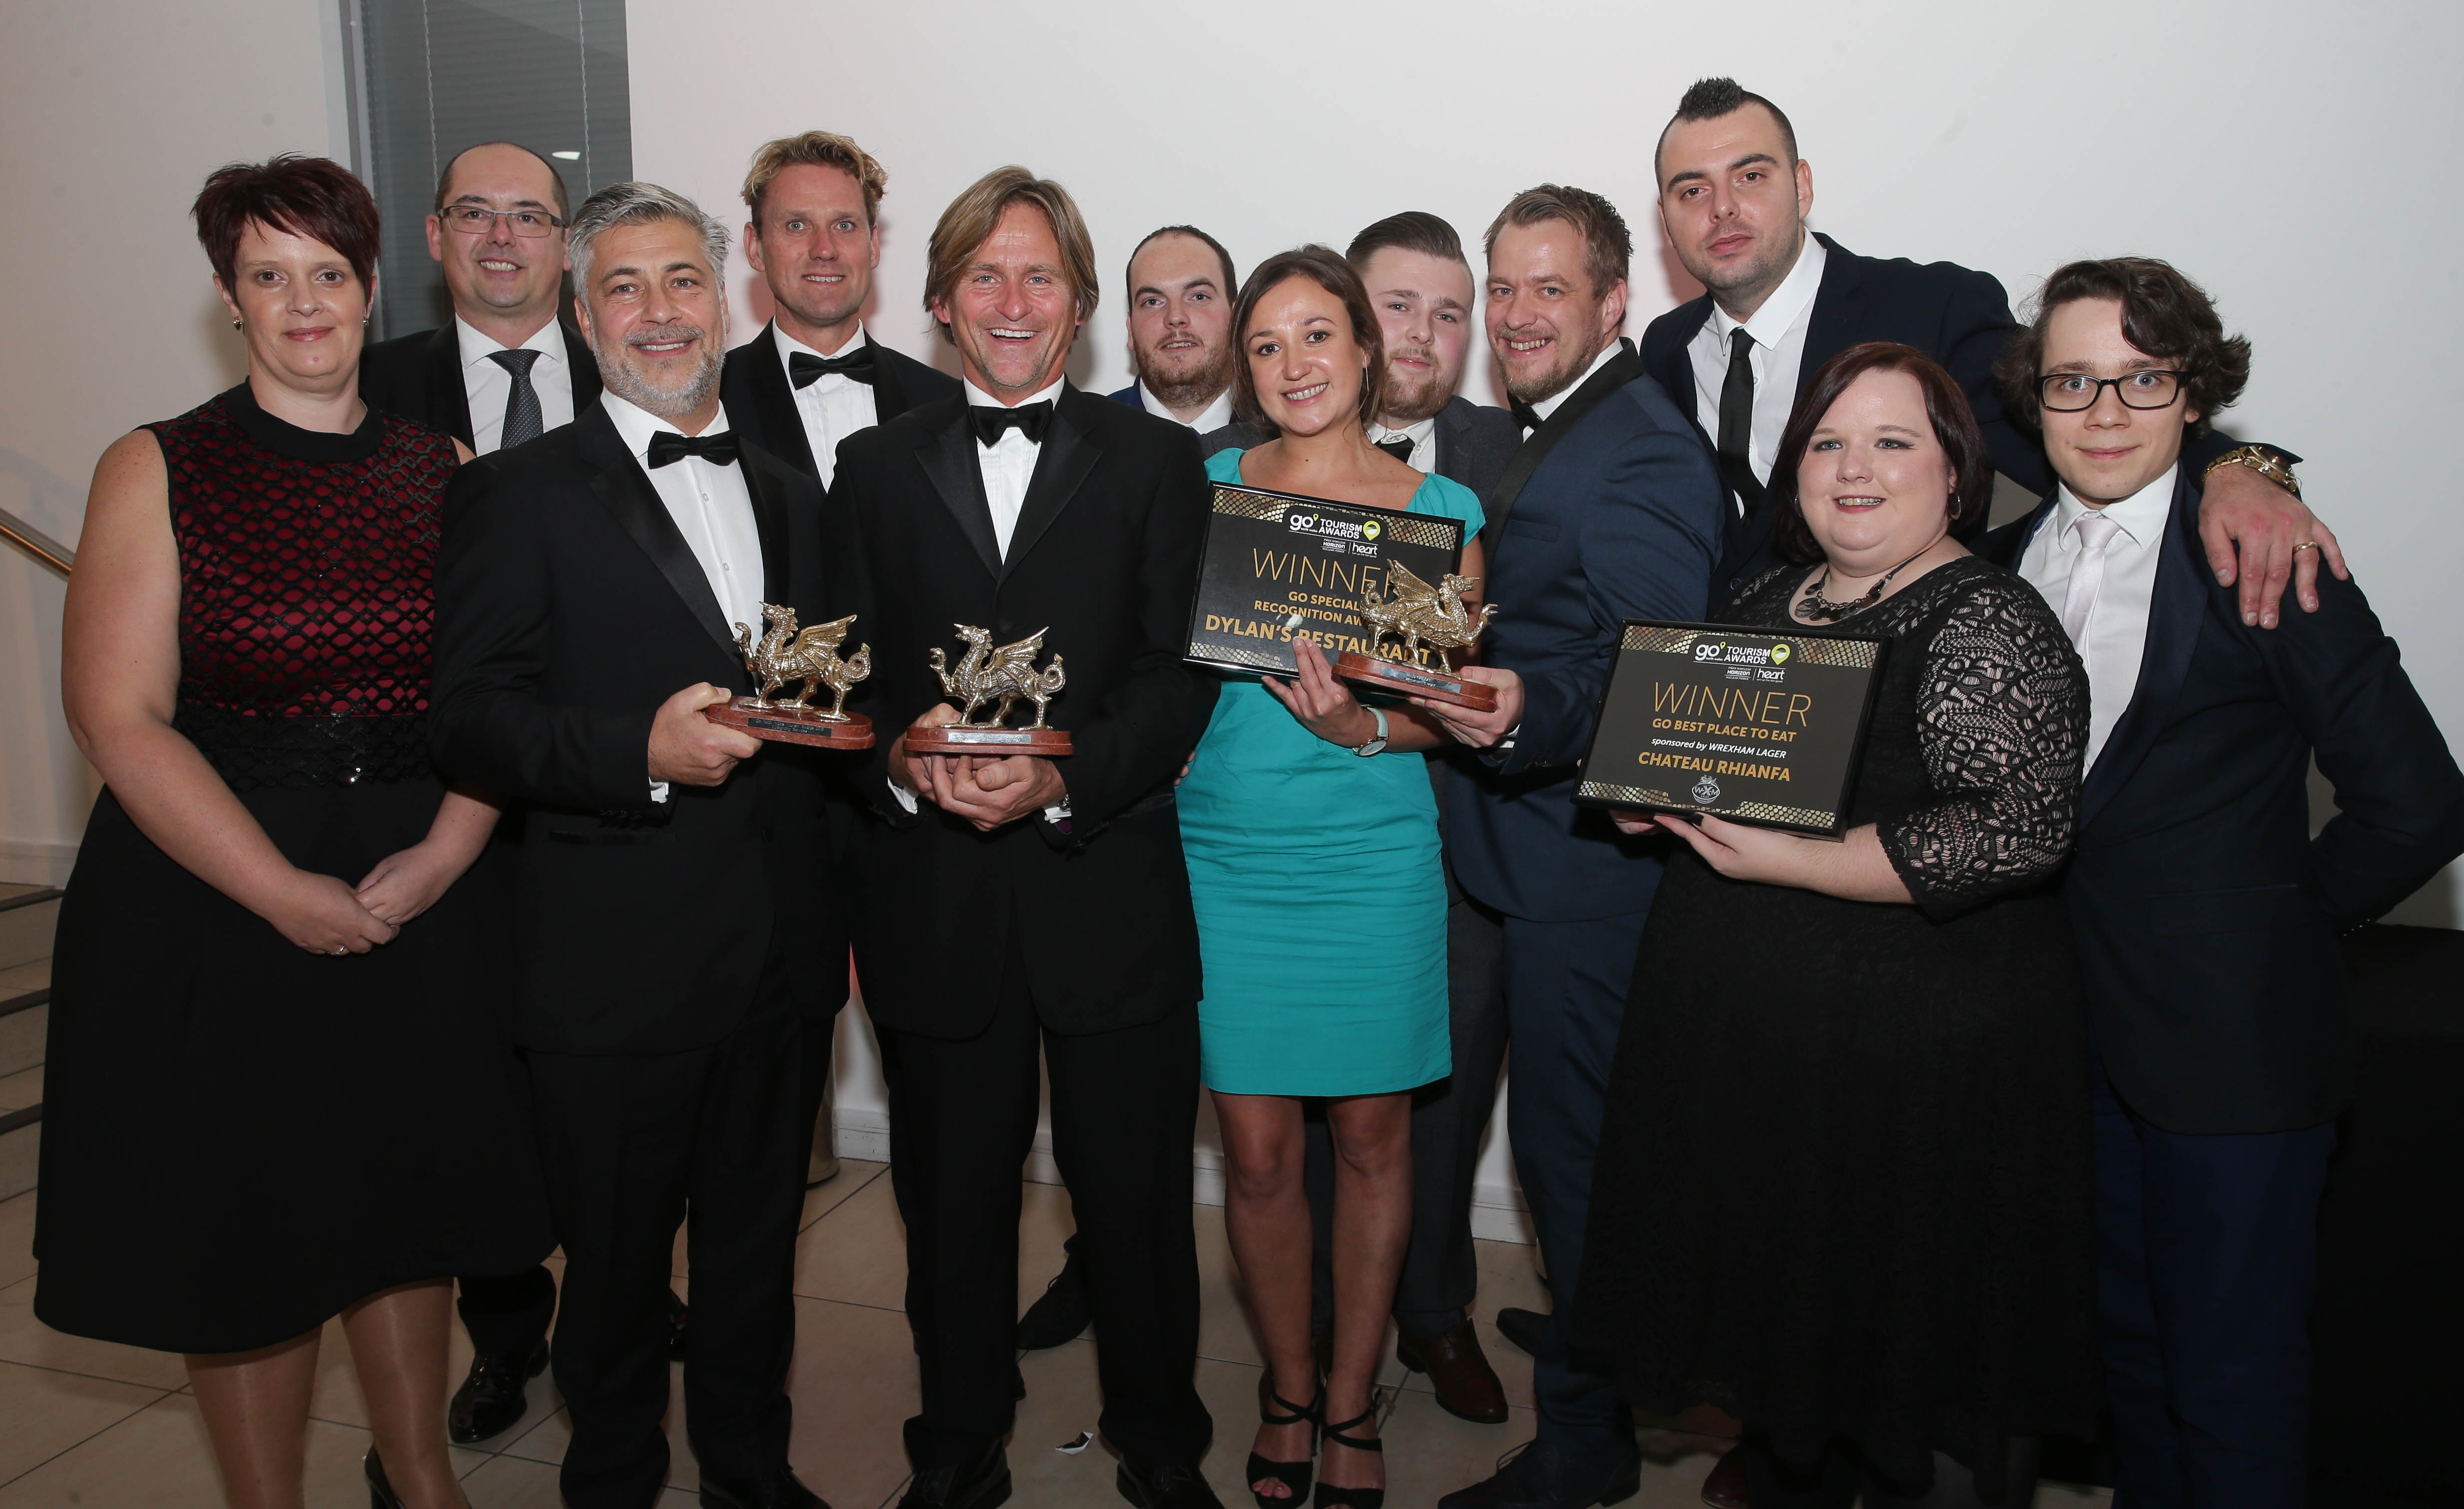 Restaurant group tastes success at awards celebrating “world class” tourism in North Wales